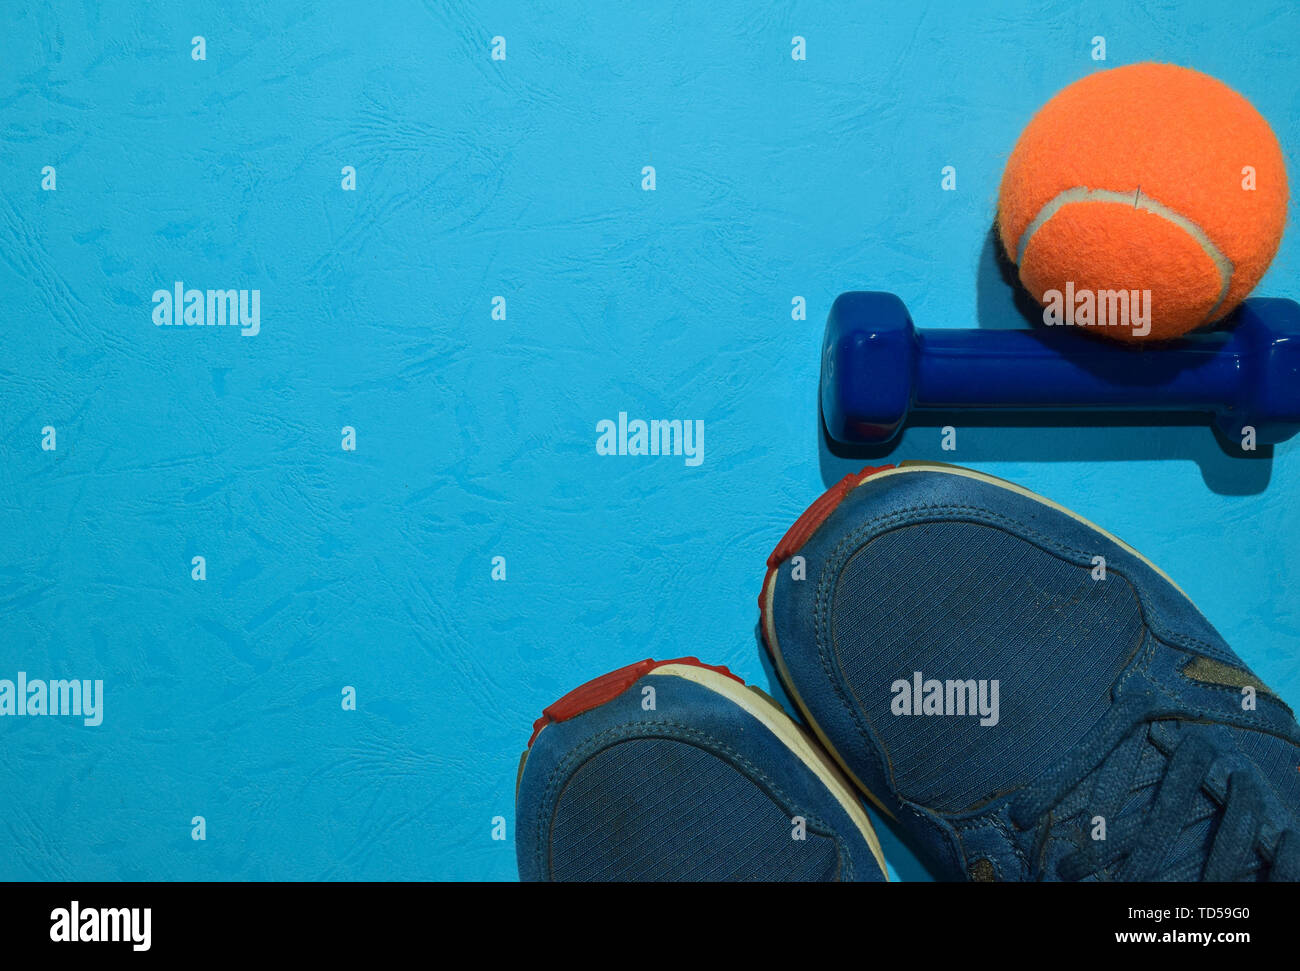 blue dumbbell, sneakers and orange tennis ball indicating workout plan on blue background. Top view with copy space for any design. Healthy and fitnes Stock Photo